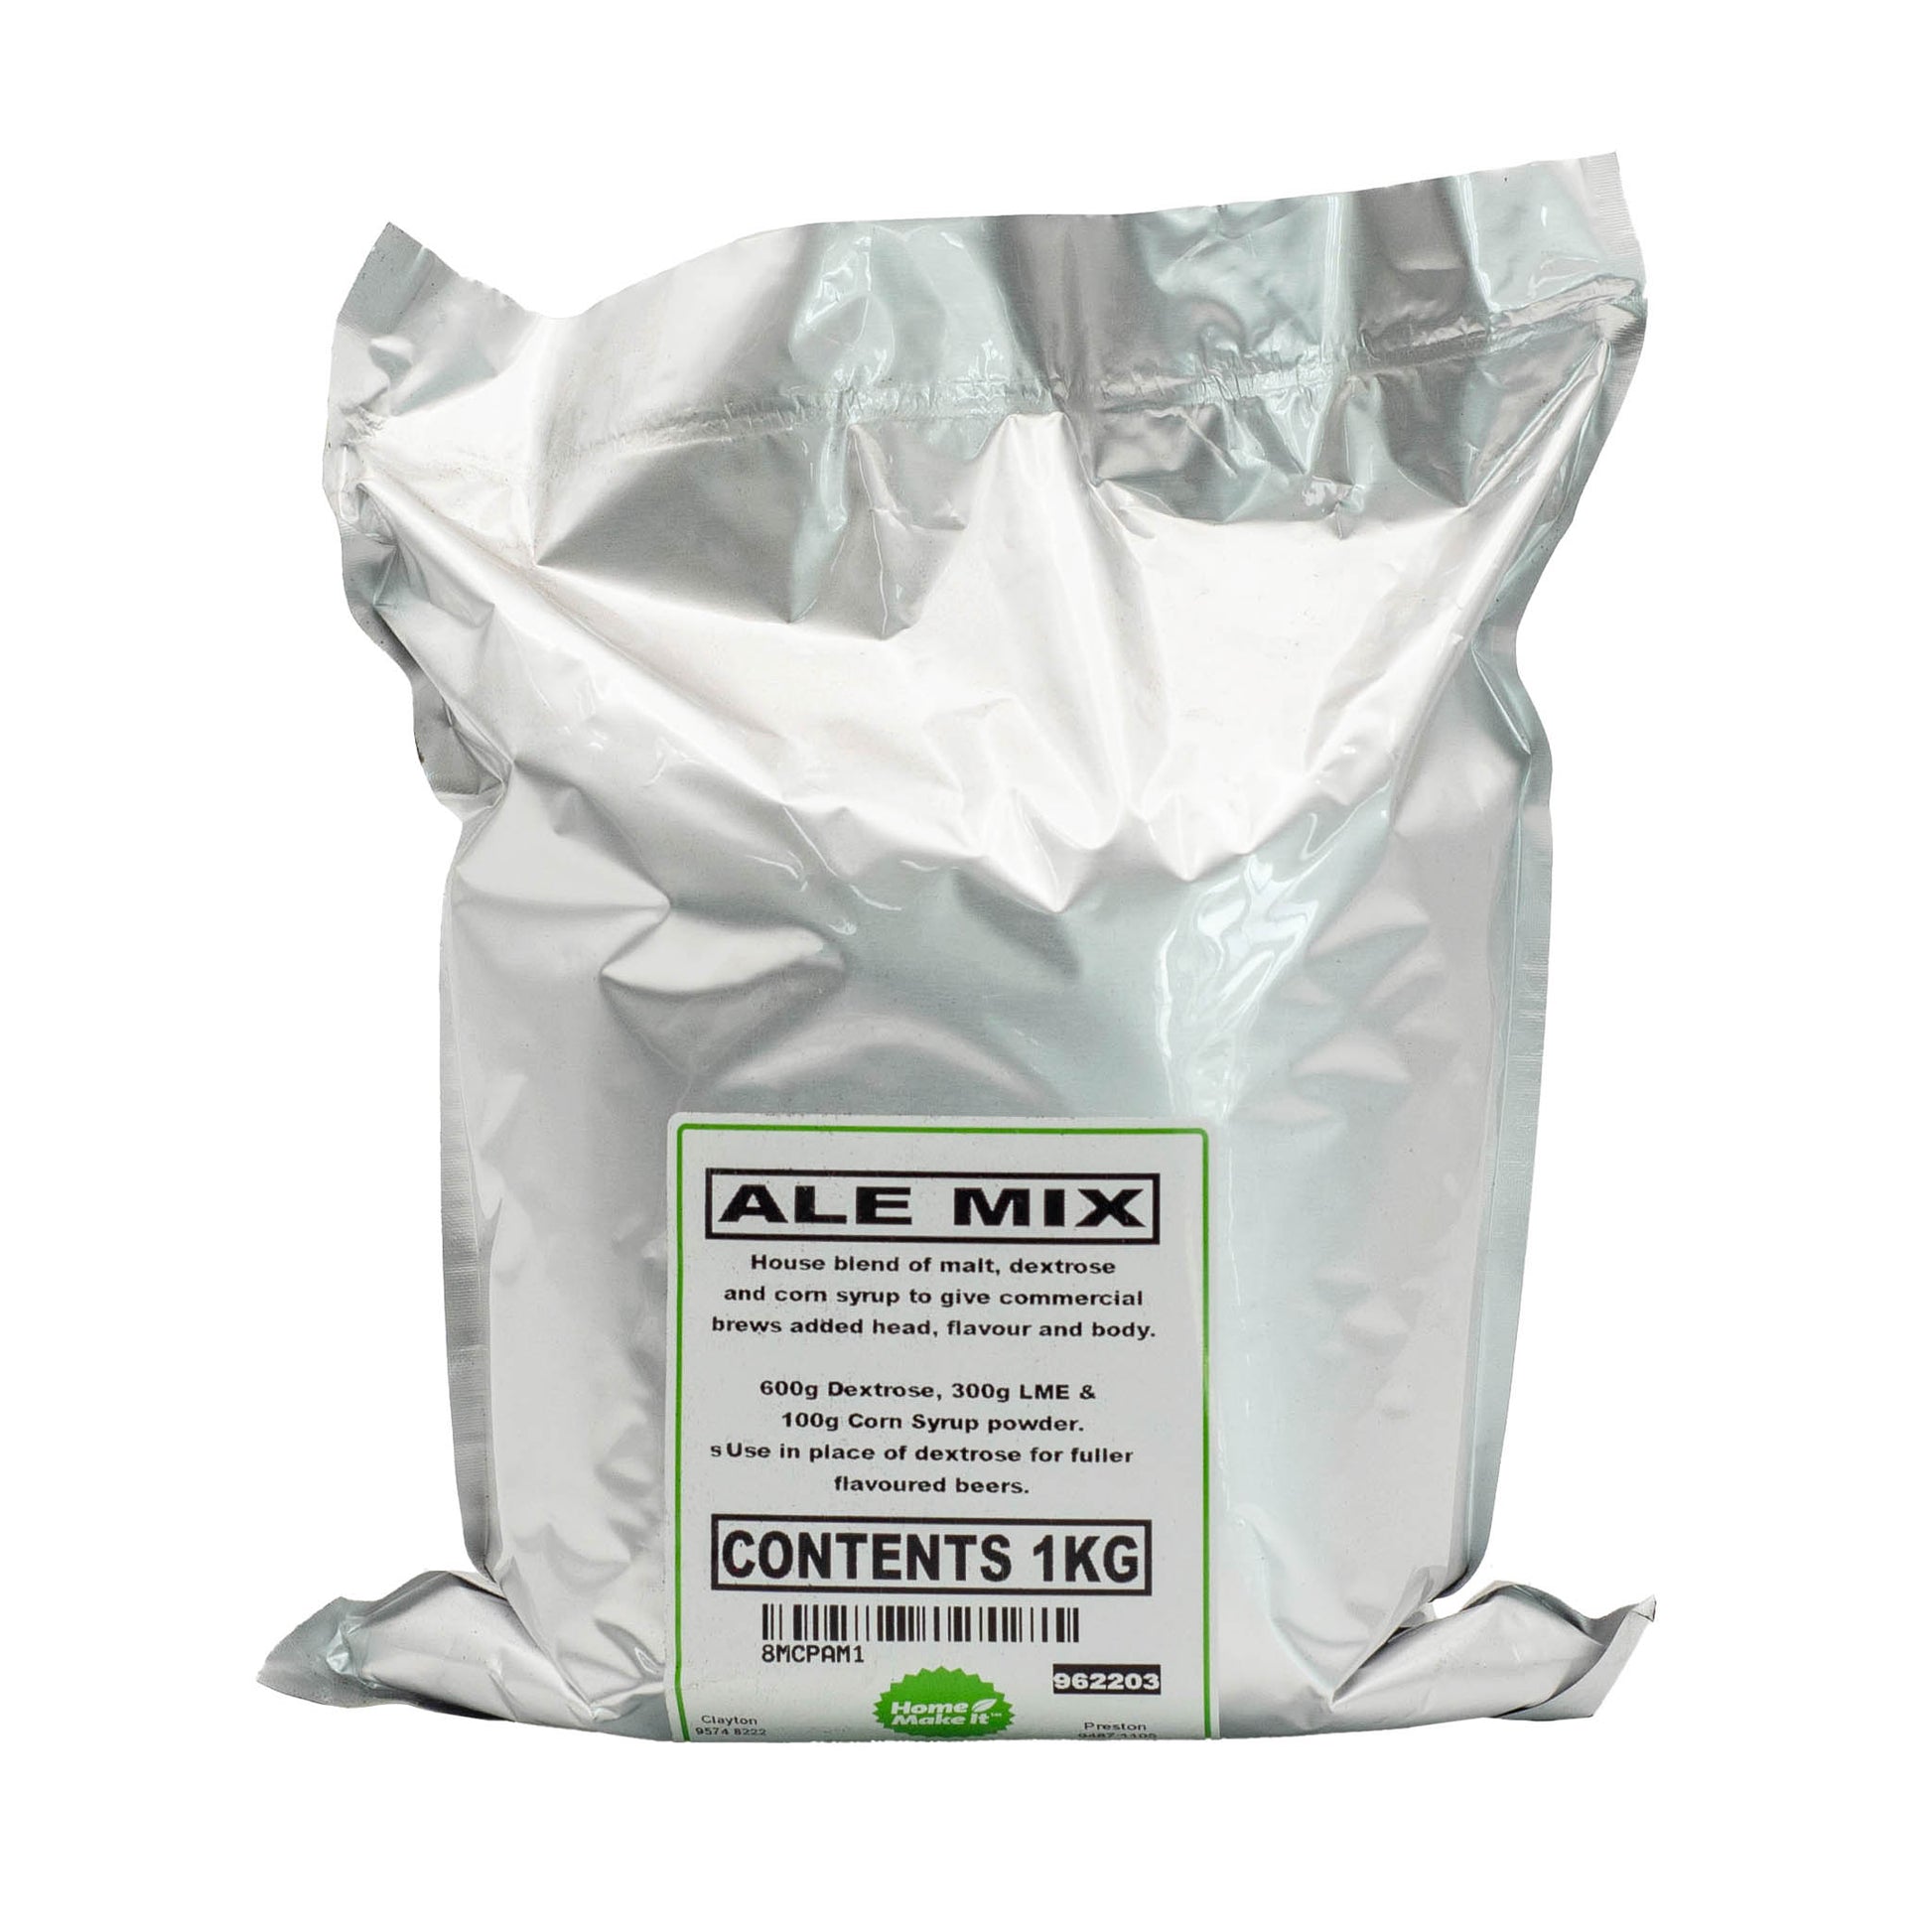 1kg bag of ale mix, specially formulated for Ale style beers. Contains malt, dextrose and corn syrup.